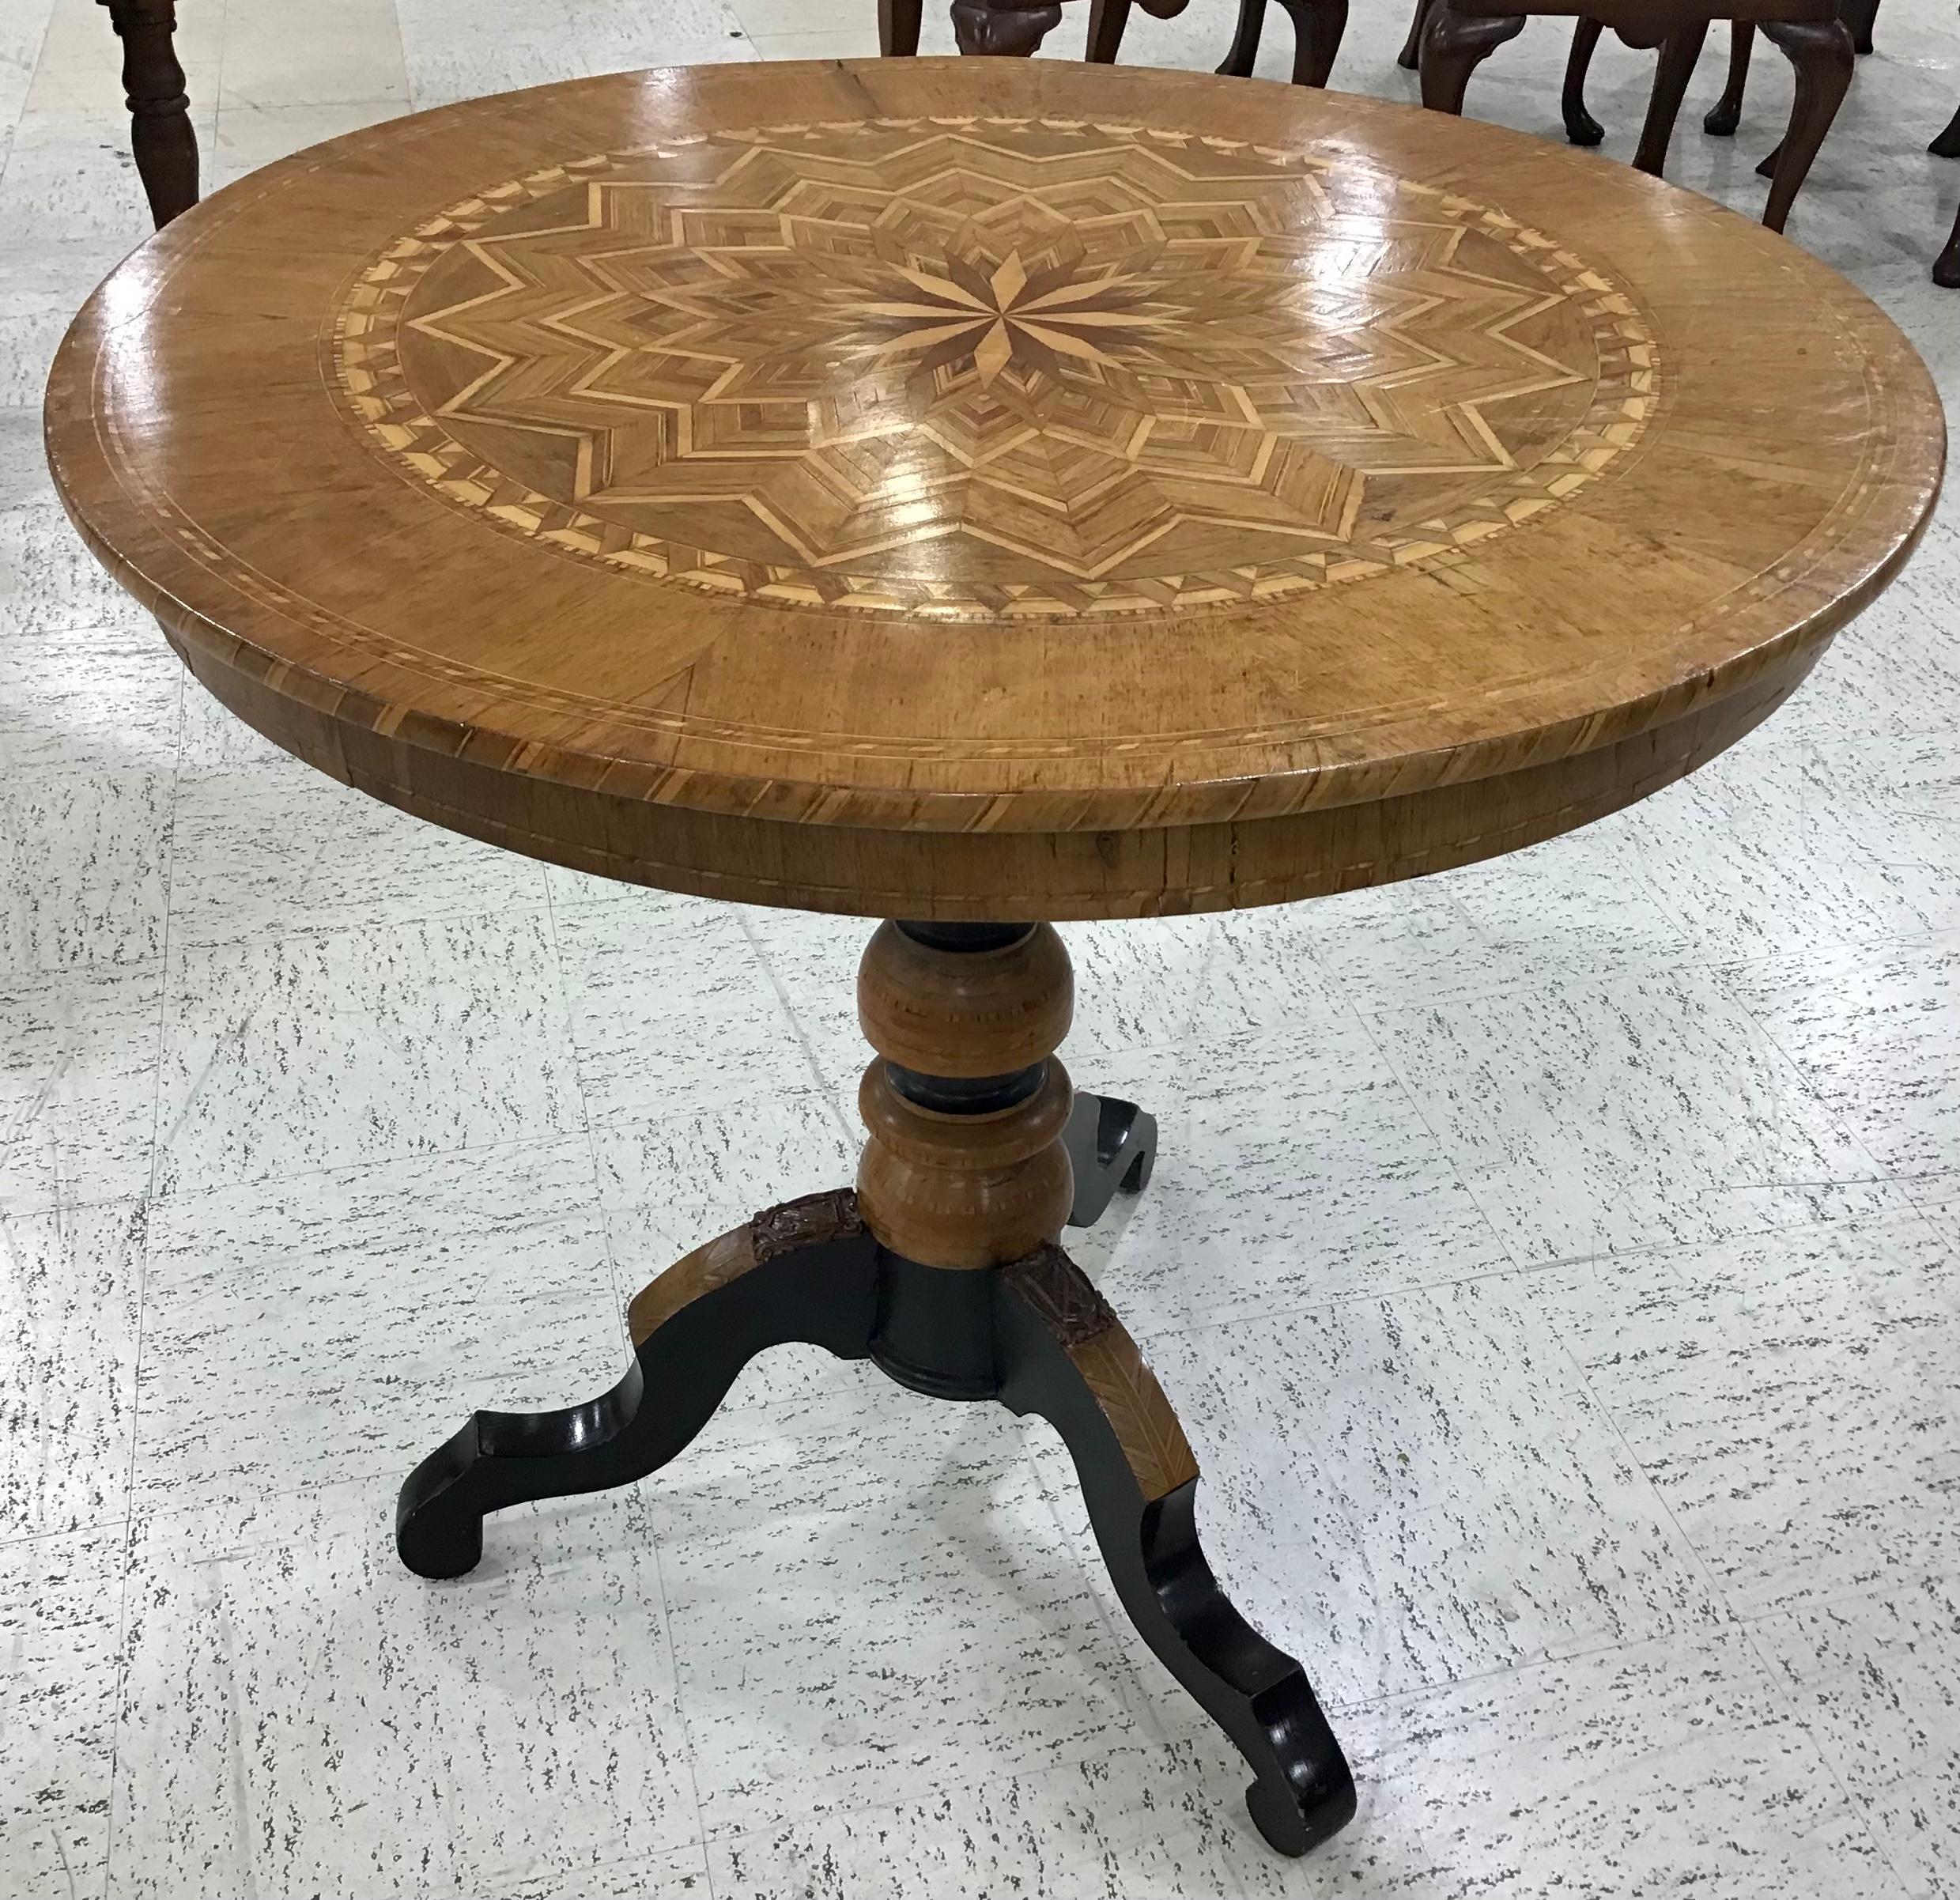 19th Century Italian Marquetry Round Side Table from Sorrento